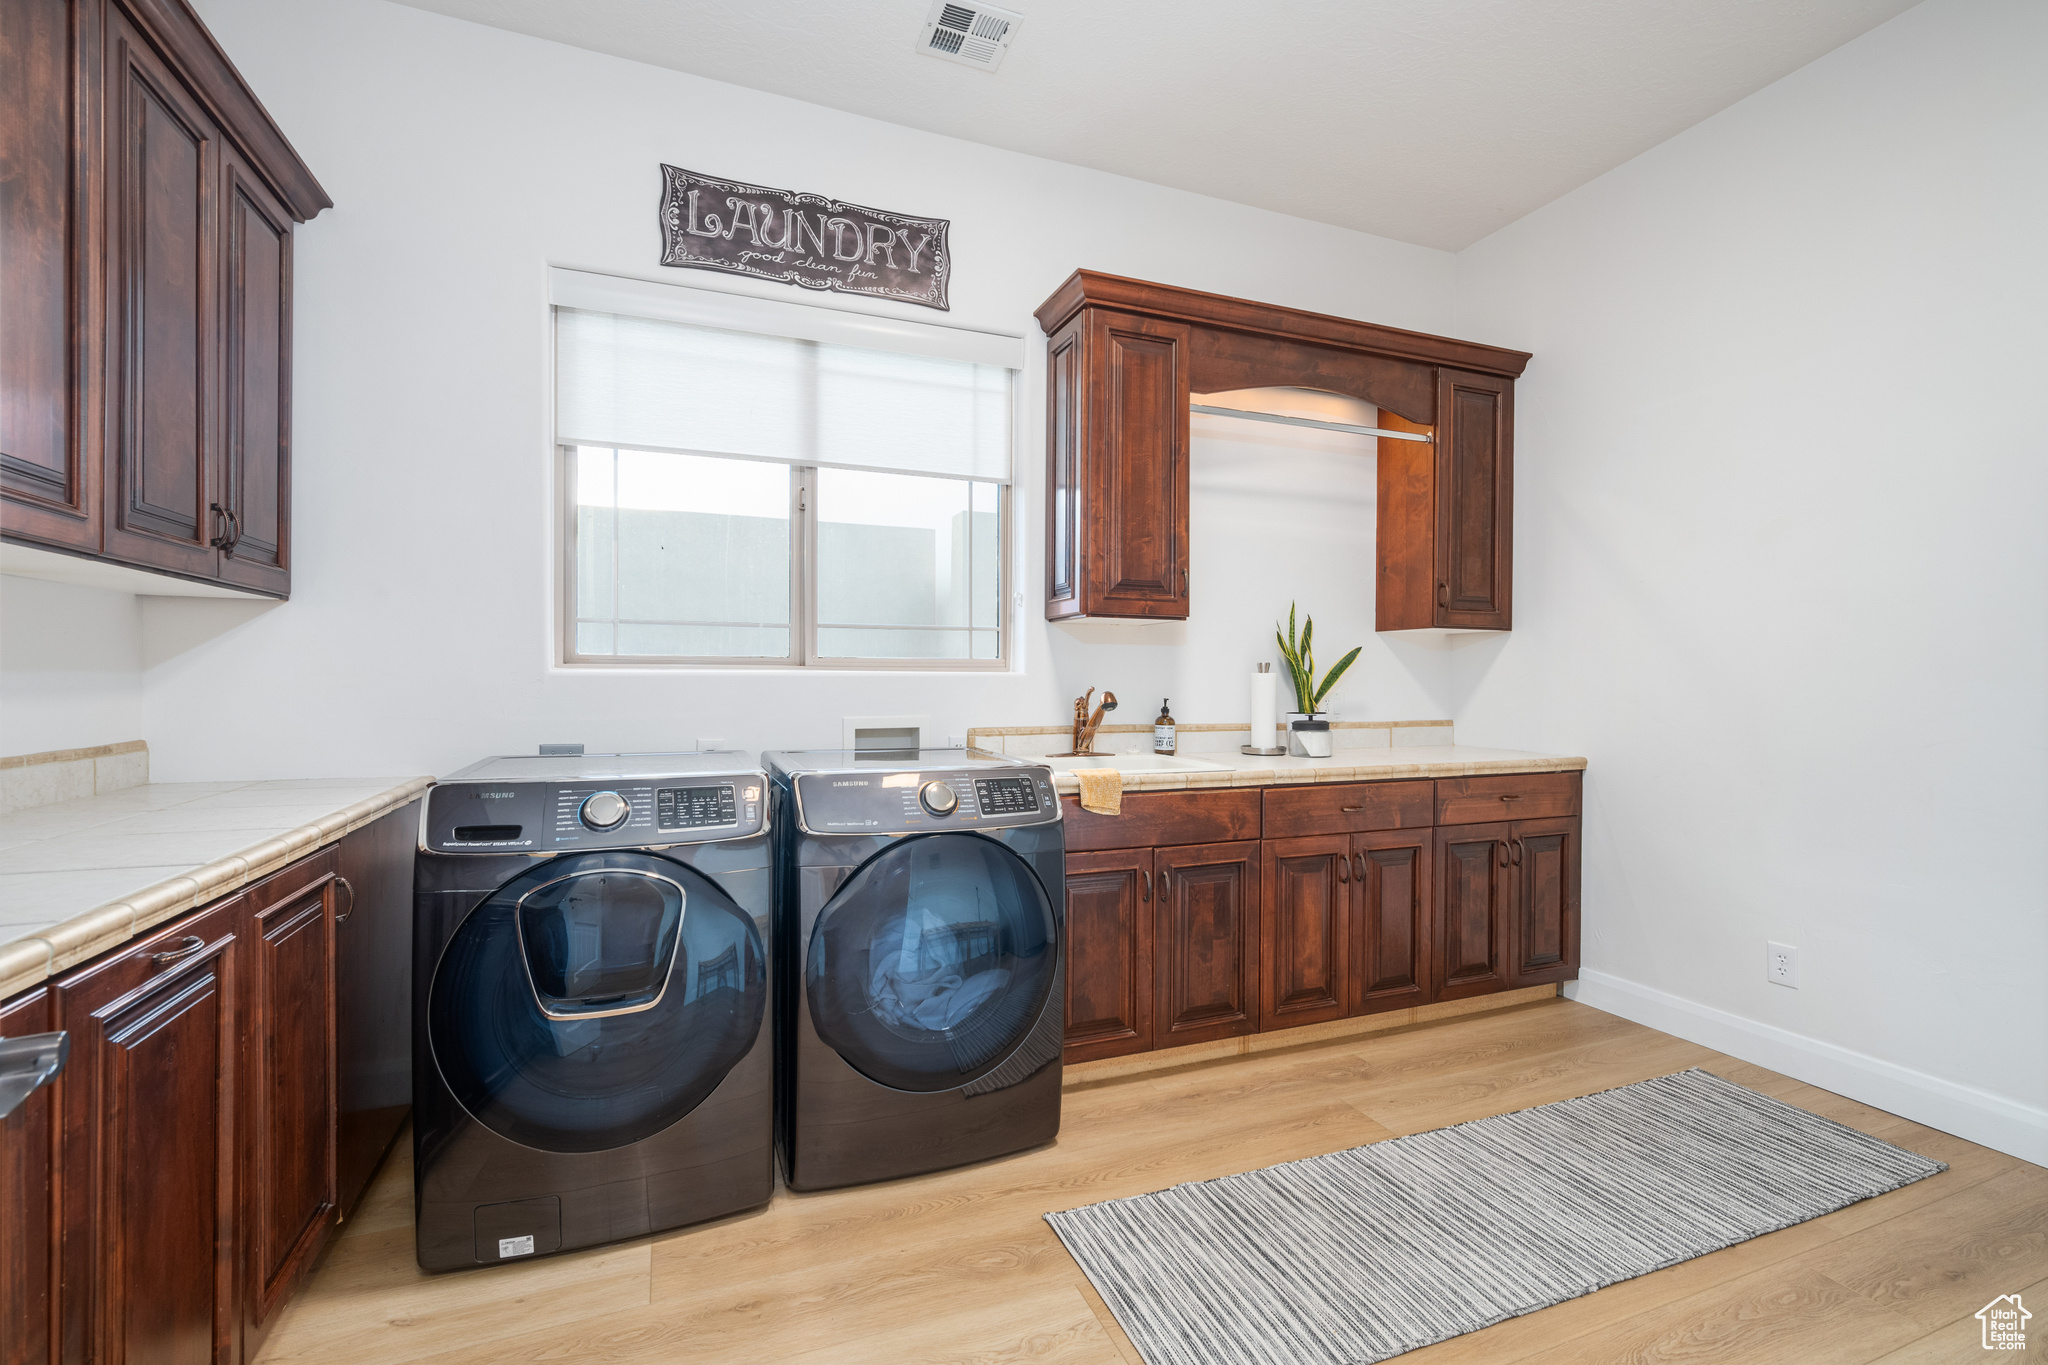 Washroom featuring light hardwood / wood-style flooring, cabinets, washer and dryer, and sink